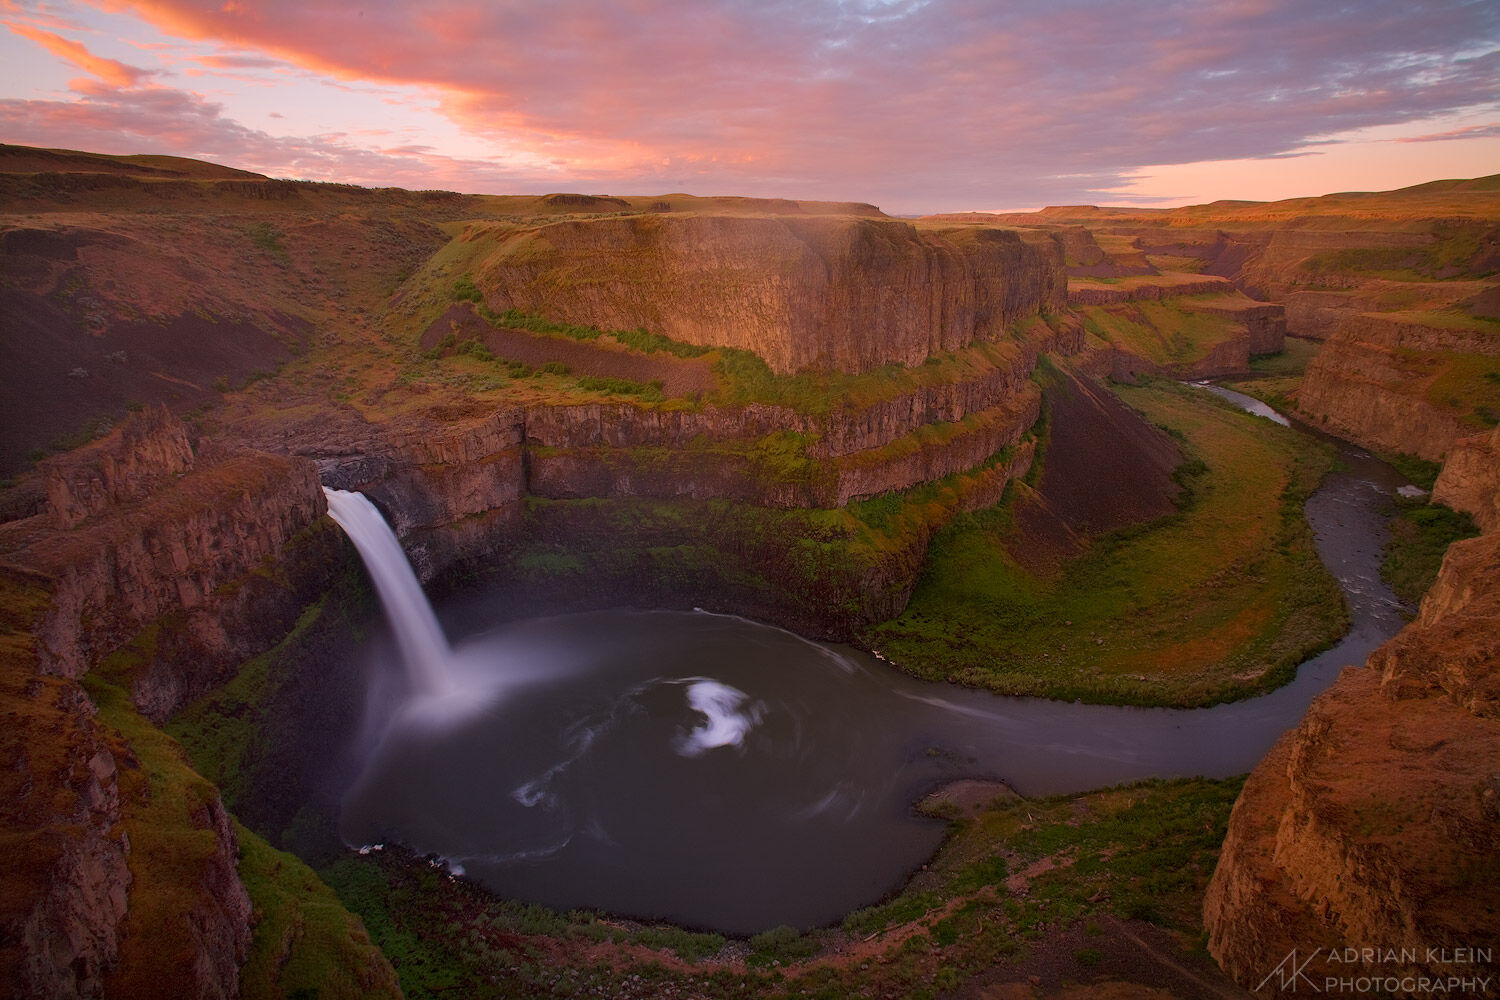 The sky lights up at sunrise over Palouse Falls in SE Washington state. Limited Edition of 50.